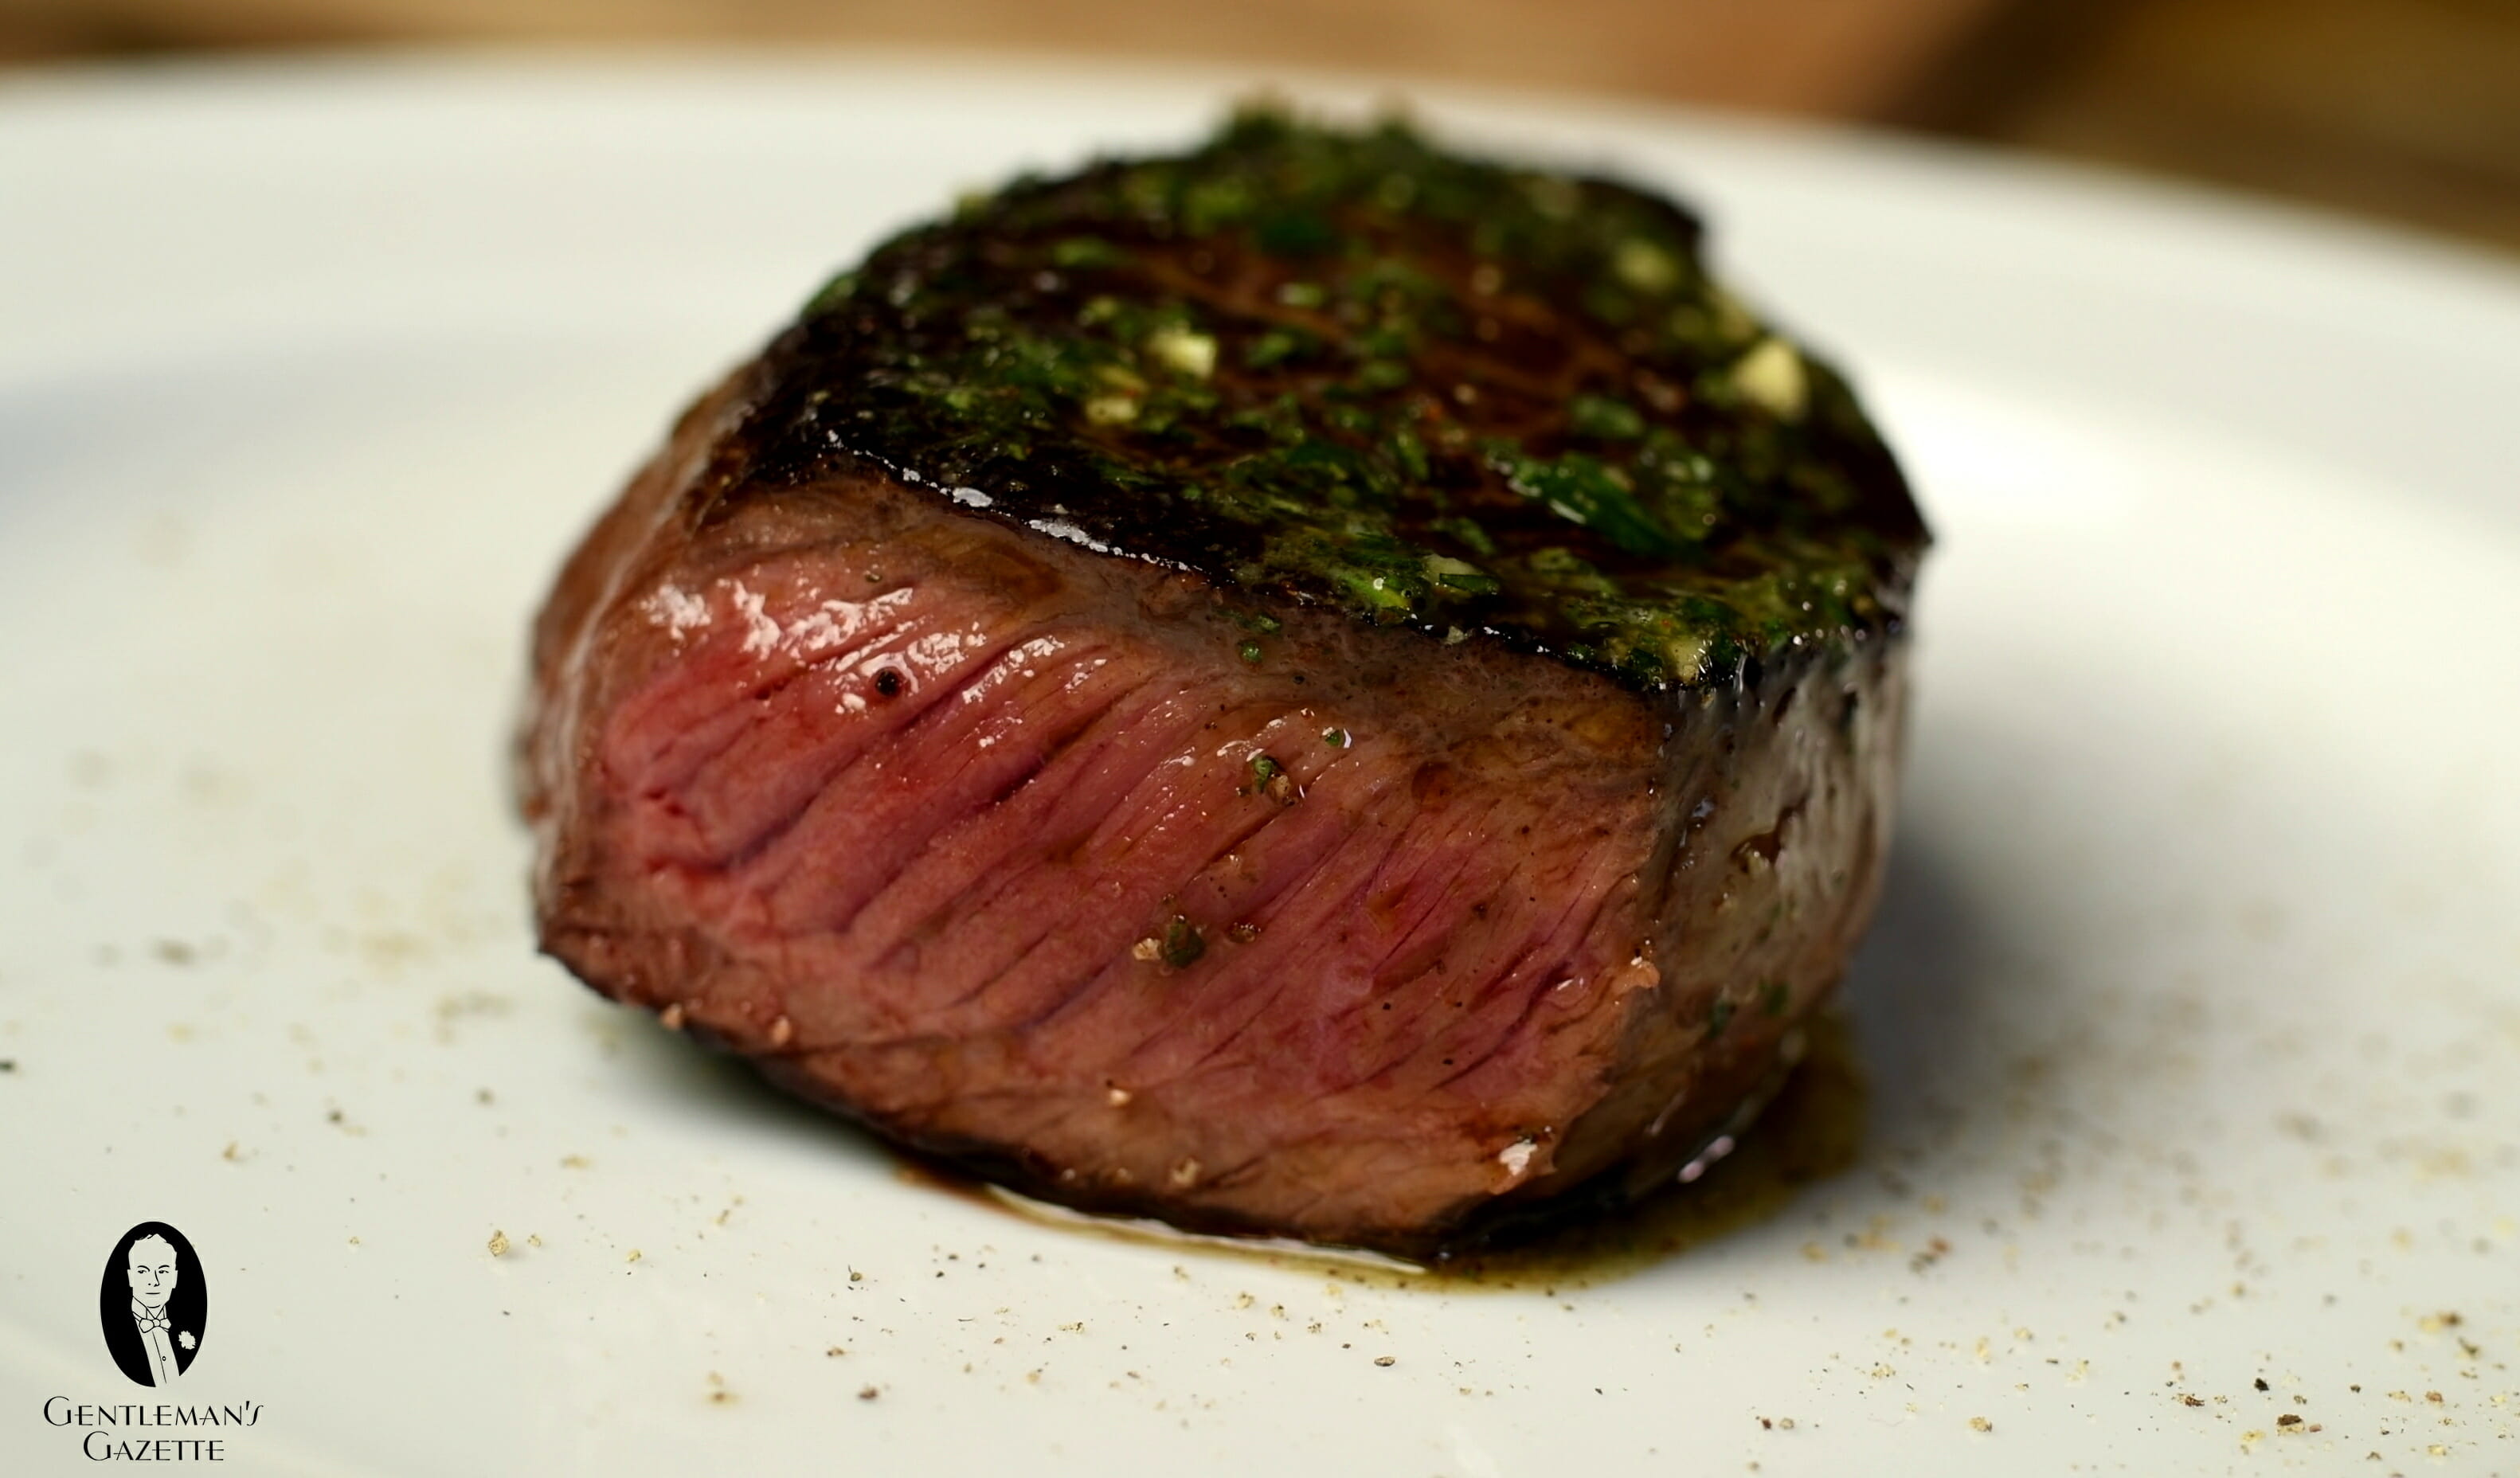 Pan seared Top Sirloin Steak topped with compound herb butter - stay tuned for our how to cook a steak and make compound butter video